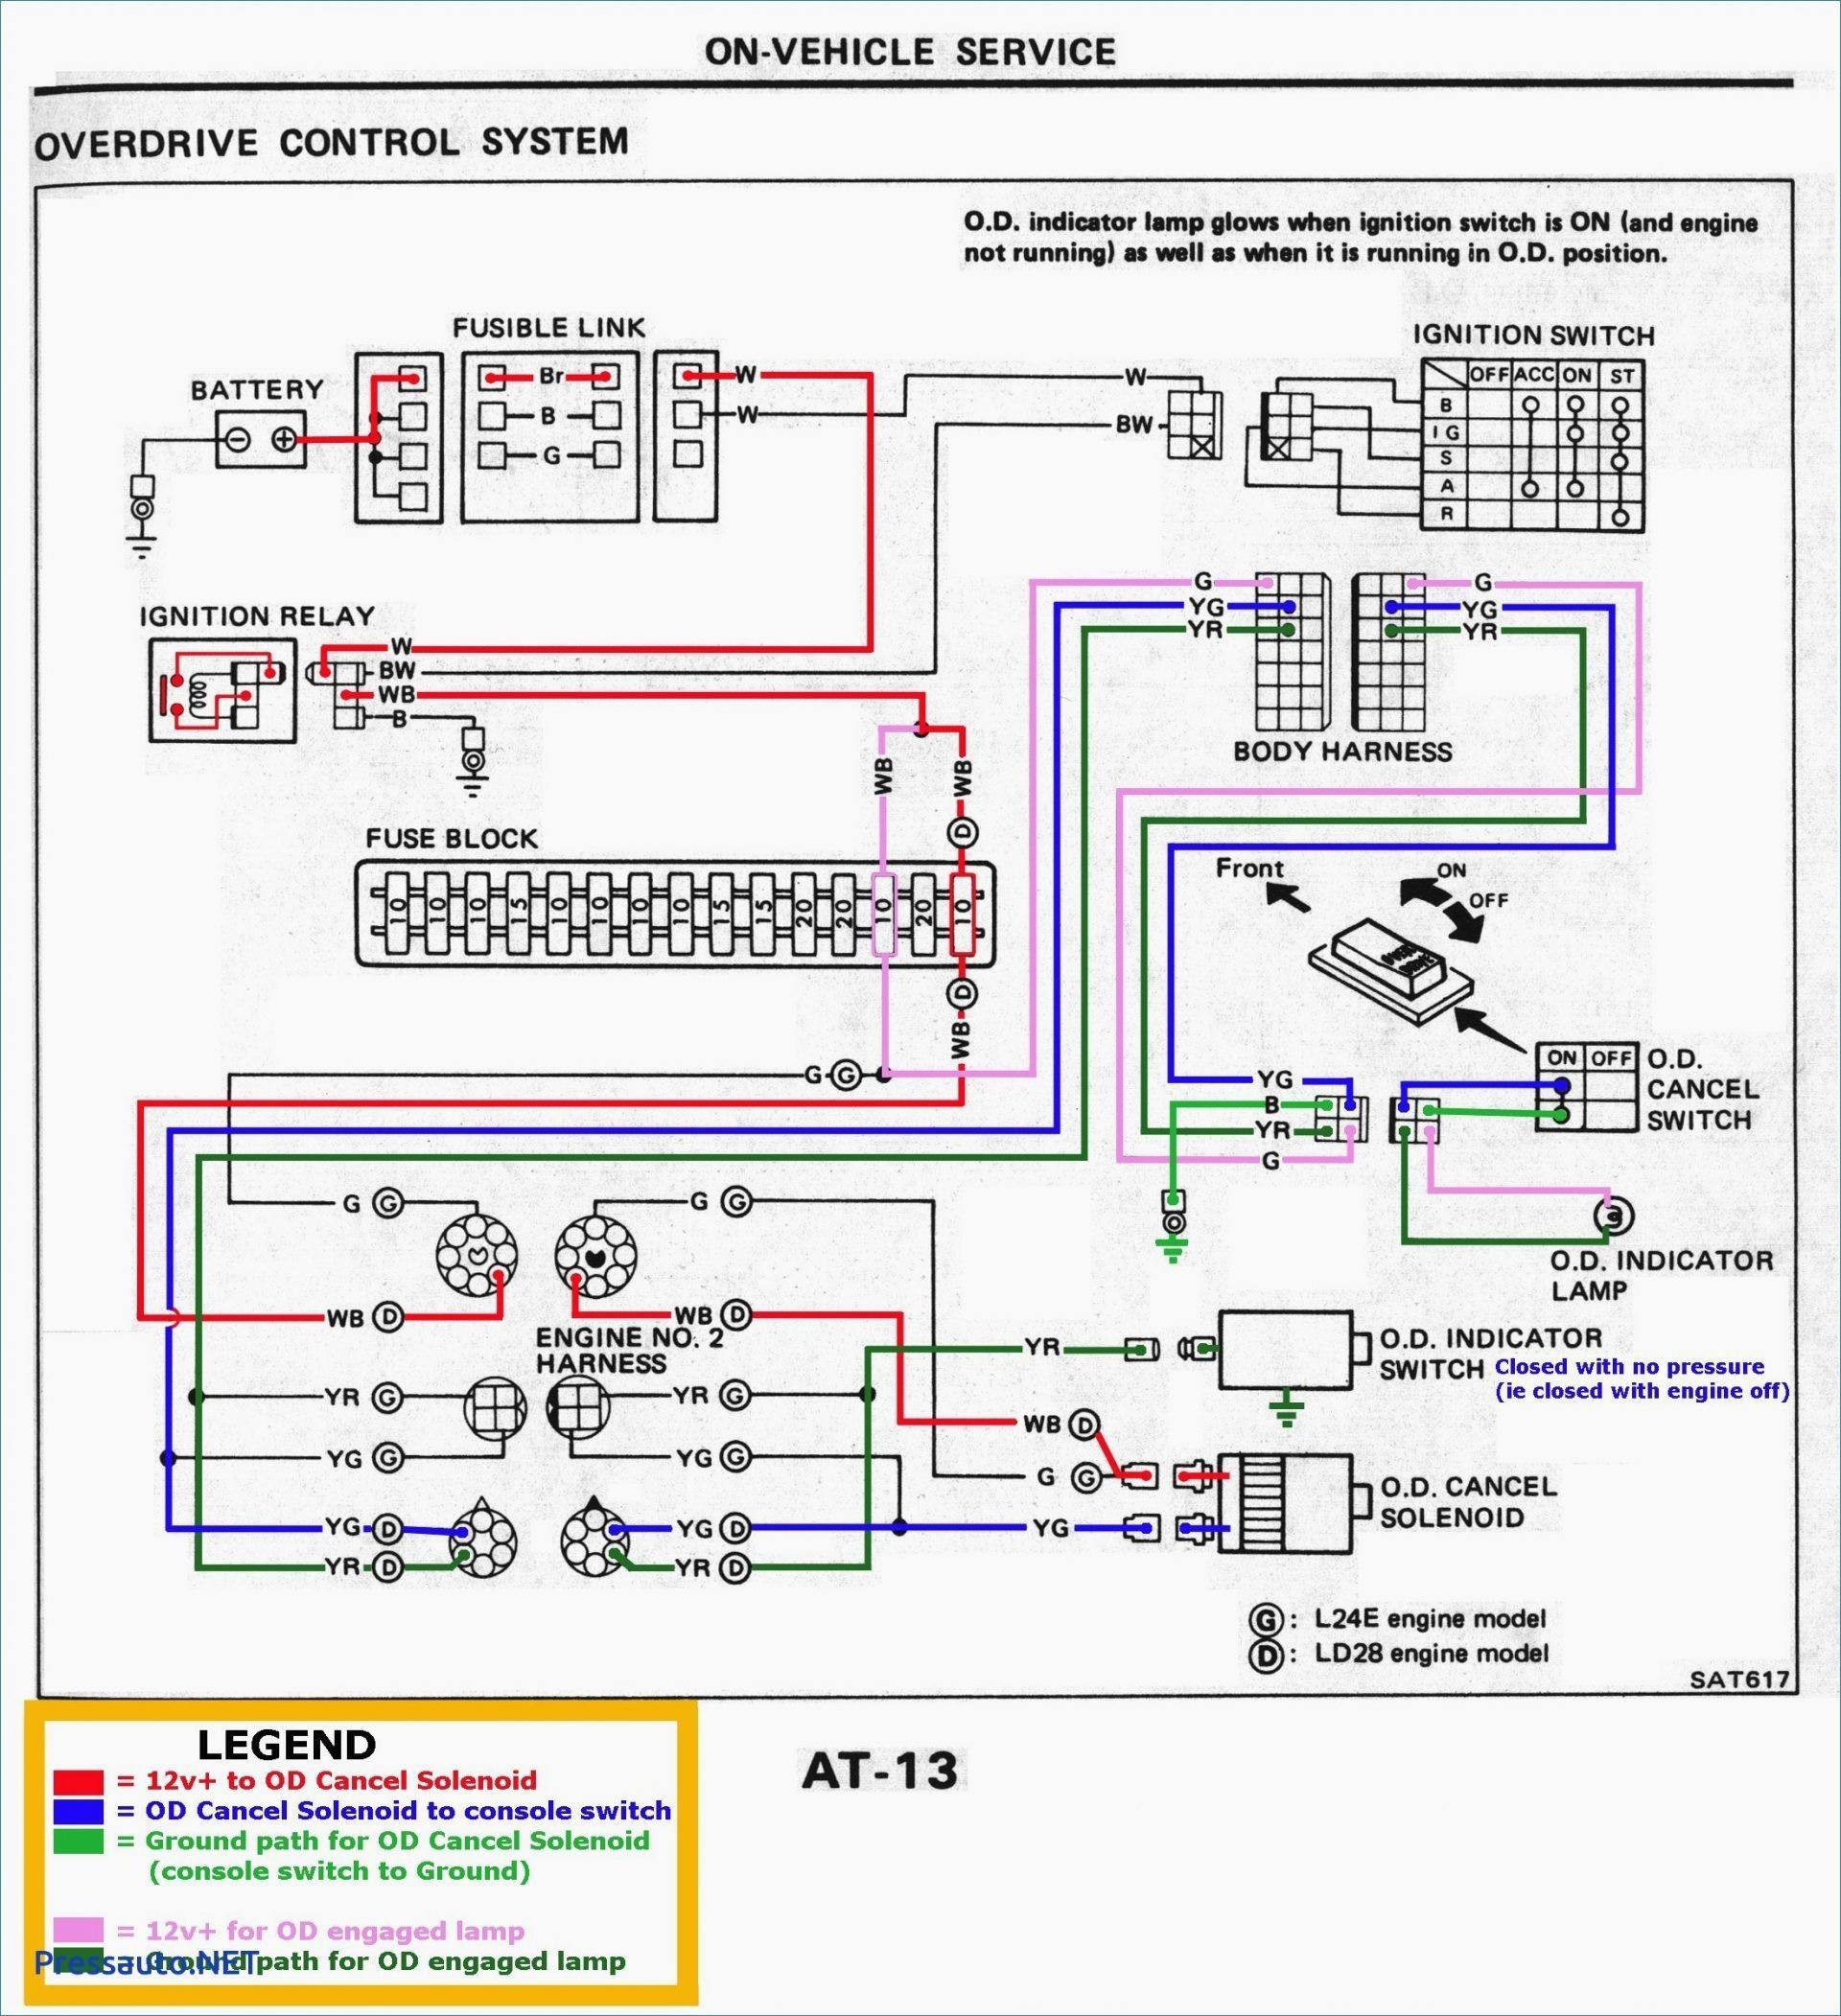 2004 ford F150 Parts Diagram New 2004 Chevy Silverado Tail Lights Trends Of 2004 ford F150 Parts Diagram